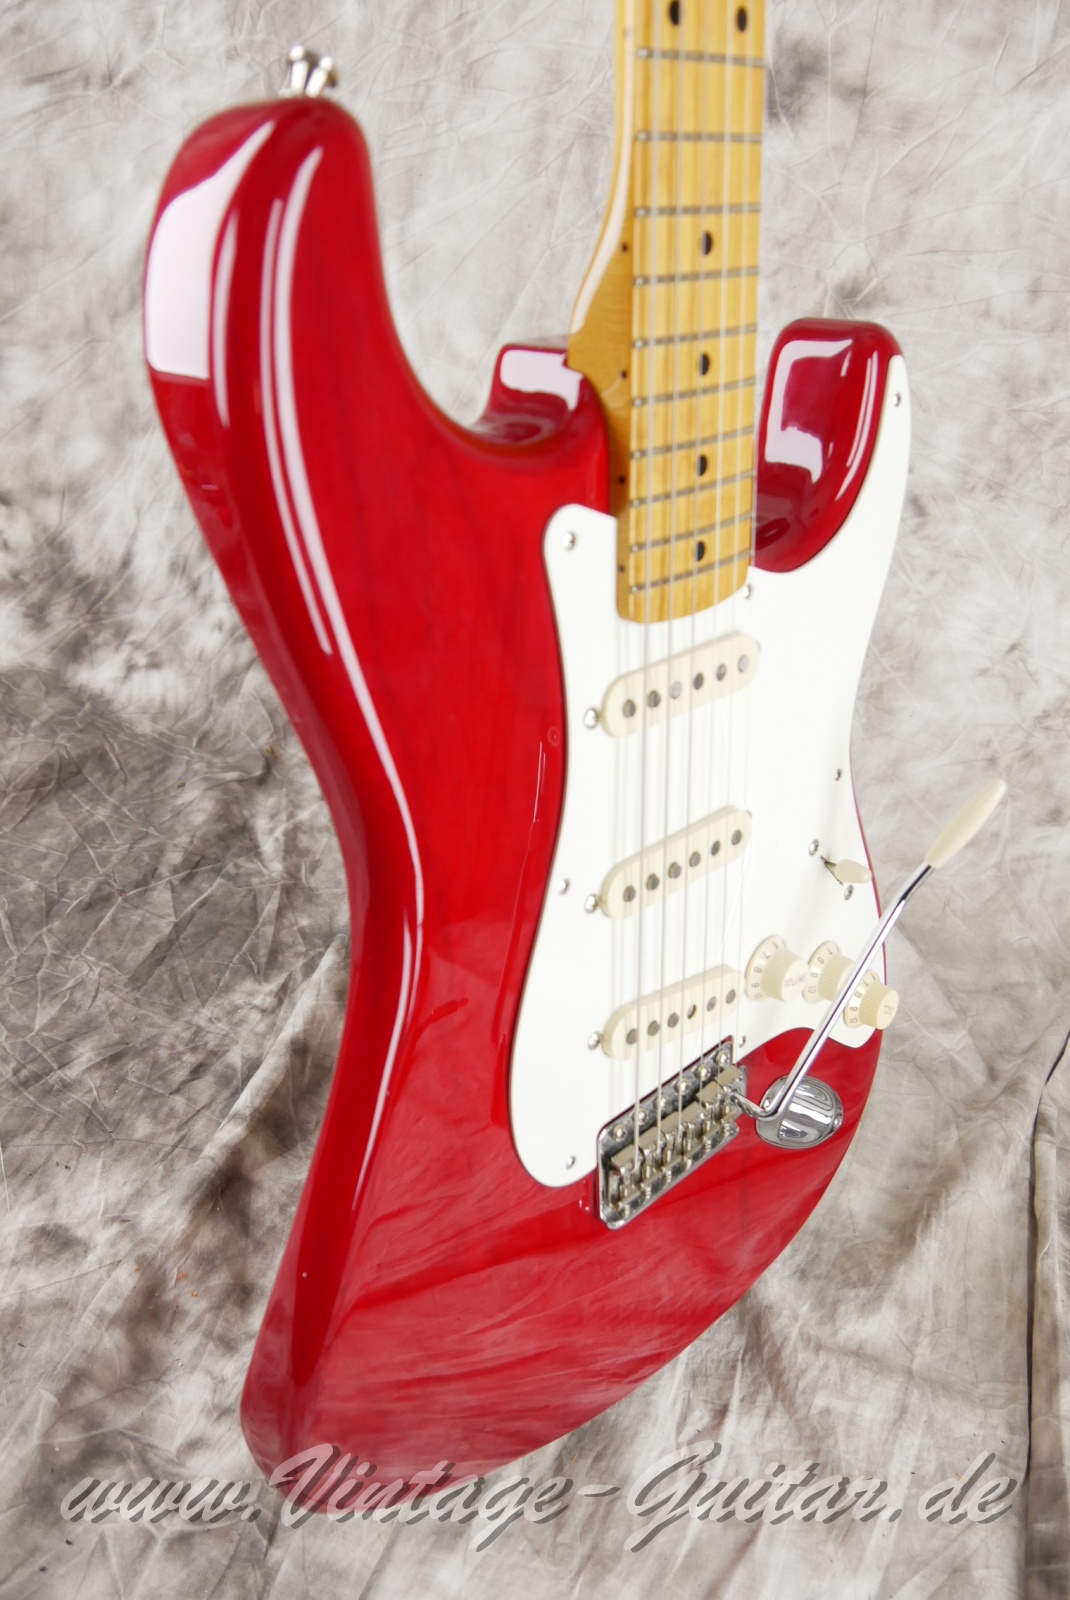 Fender_Stratocaster_classic_50s_Mexico_transparent_red_2010-009.JPG